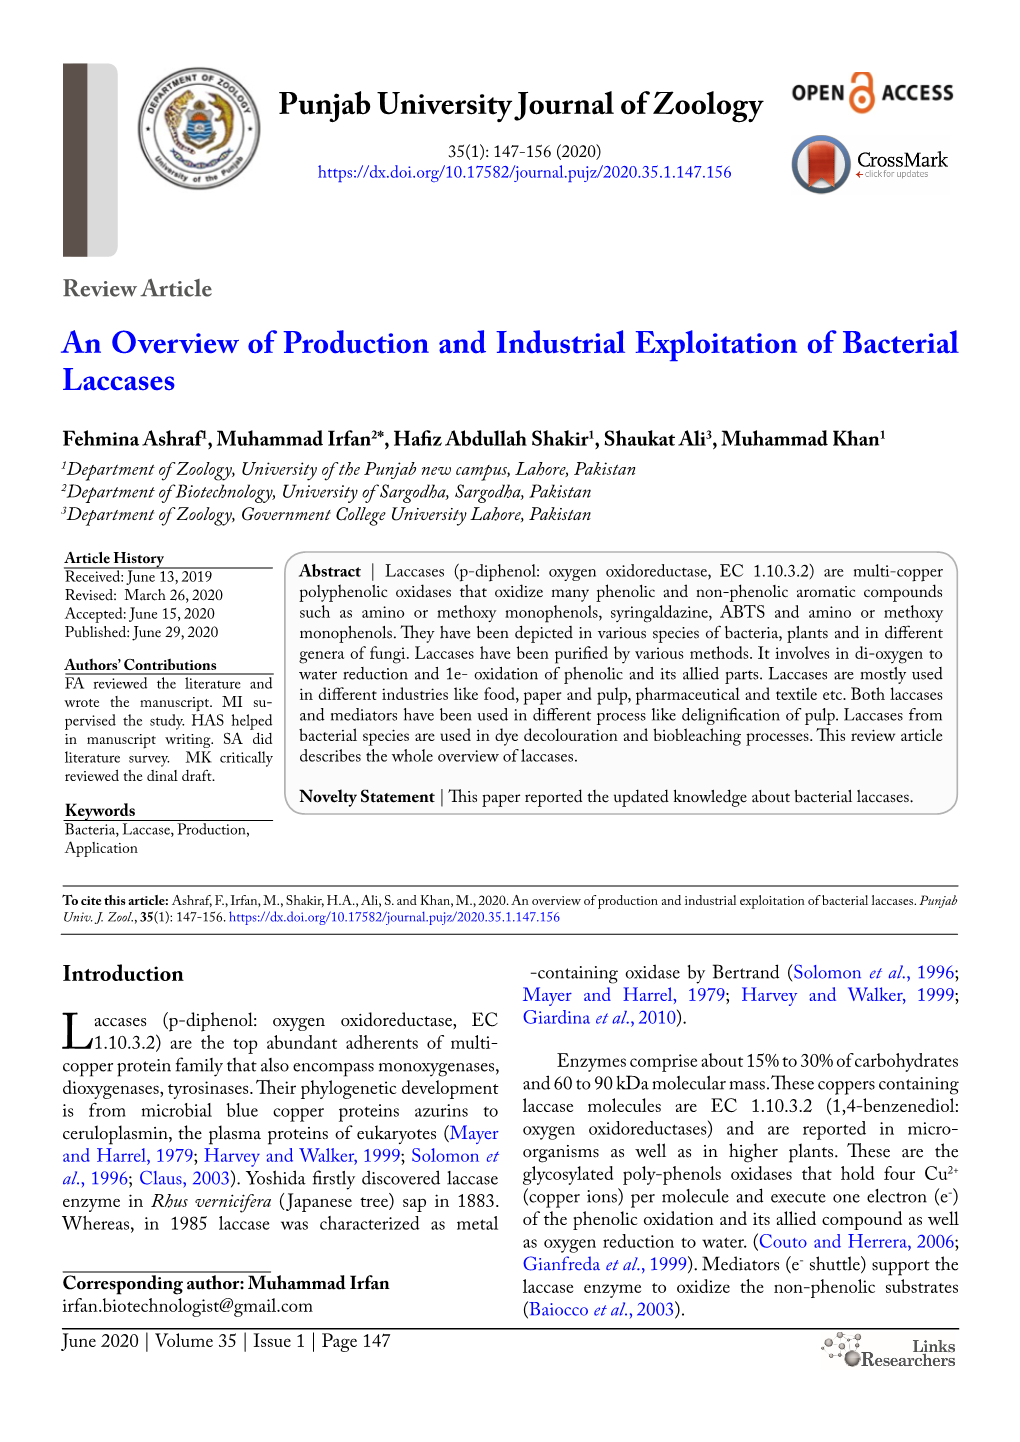 An Overview of Production and Industrial Exploitation of Bacterial Laccases